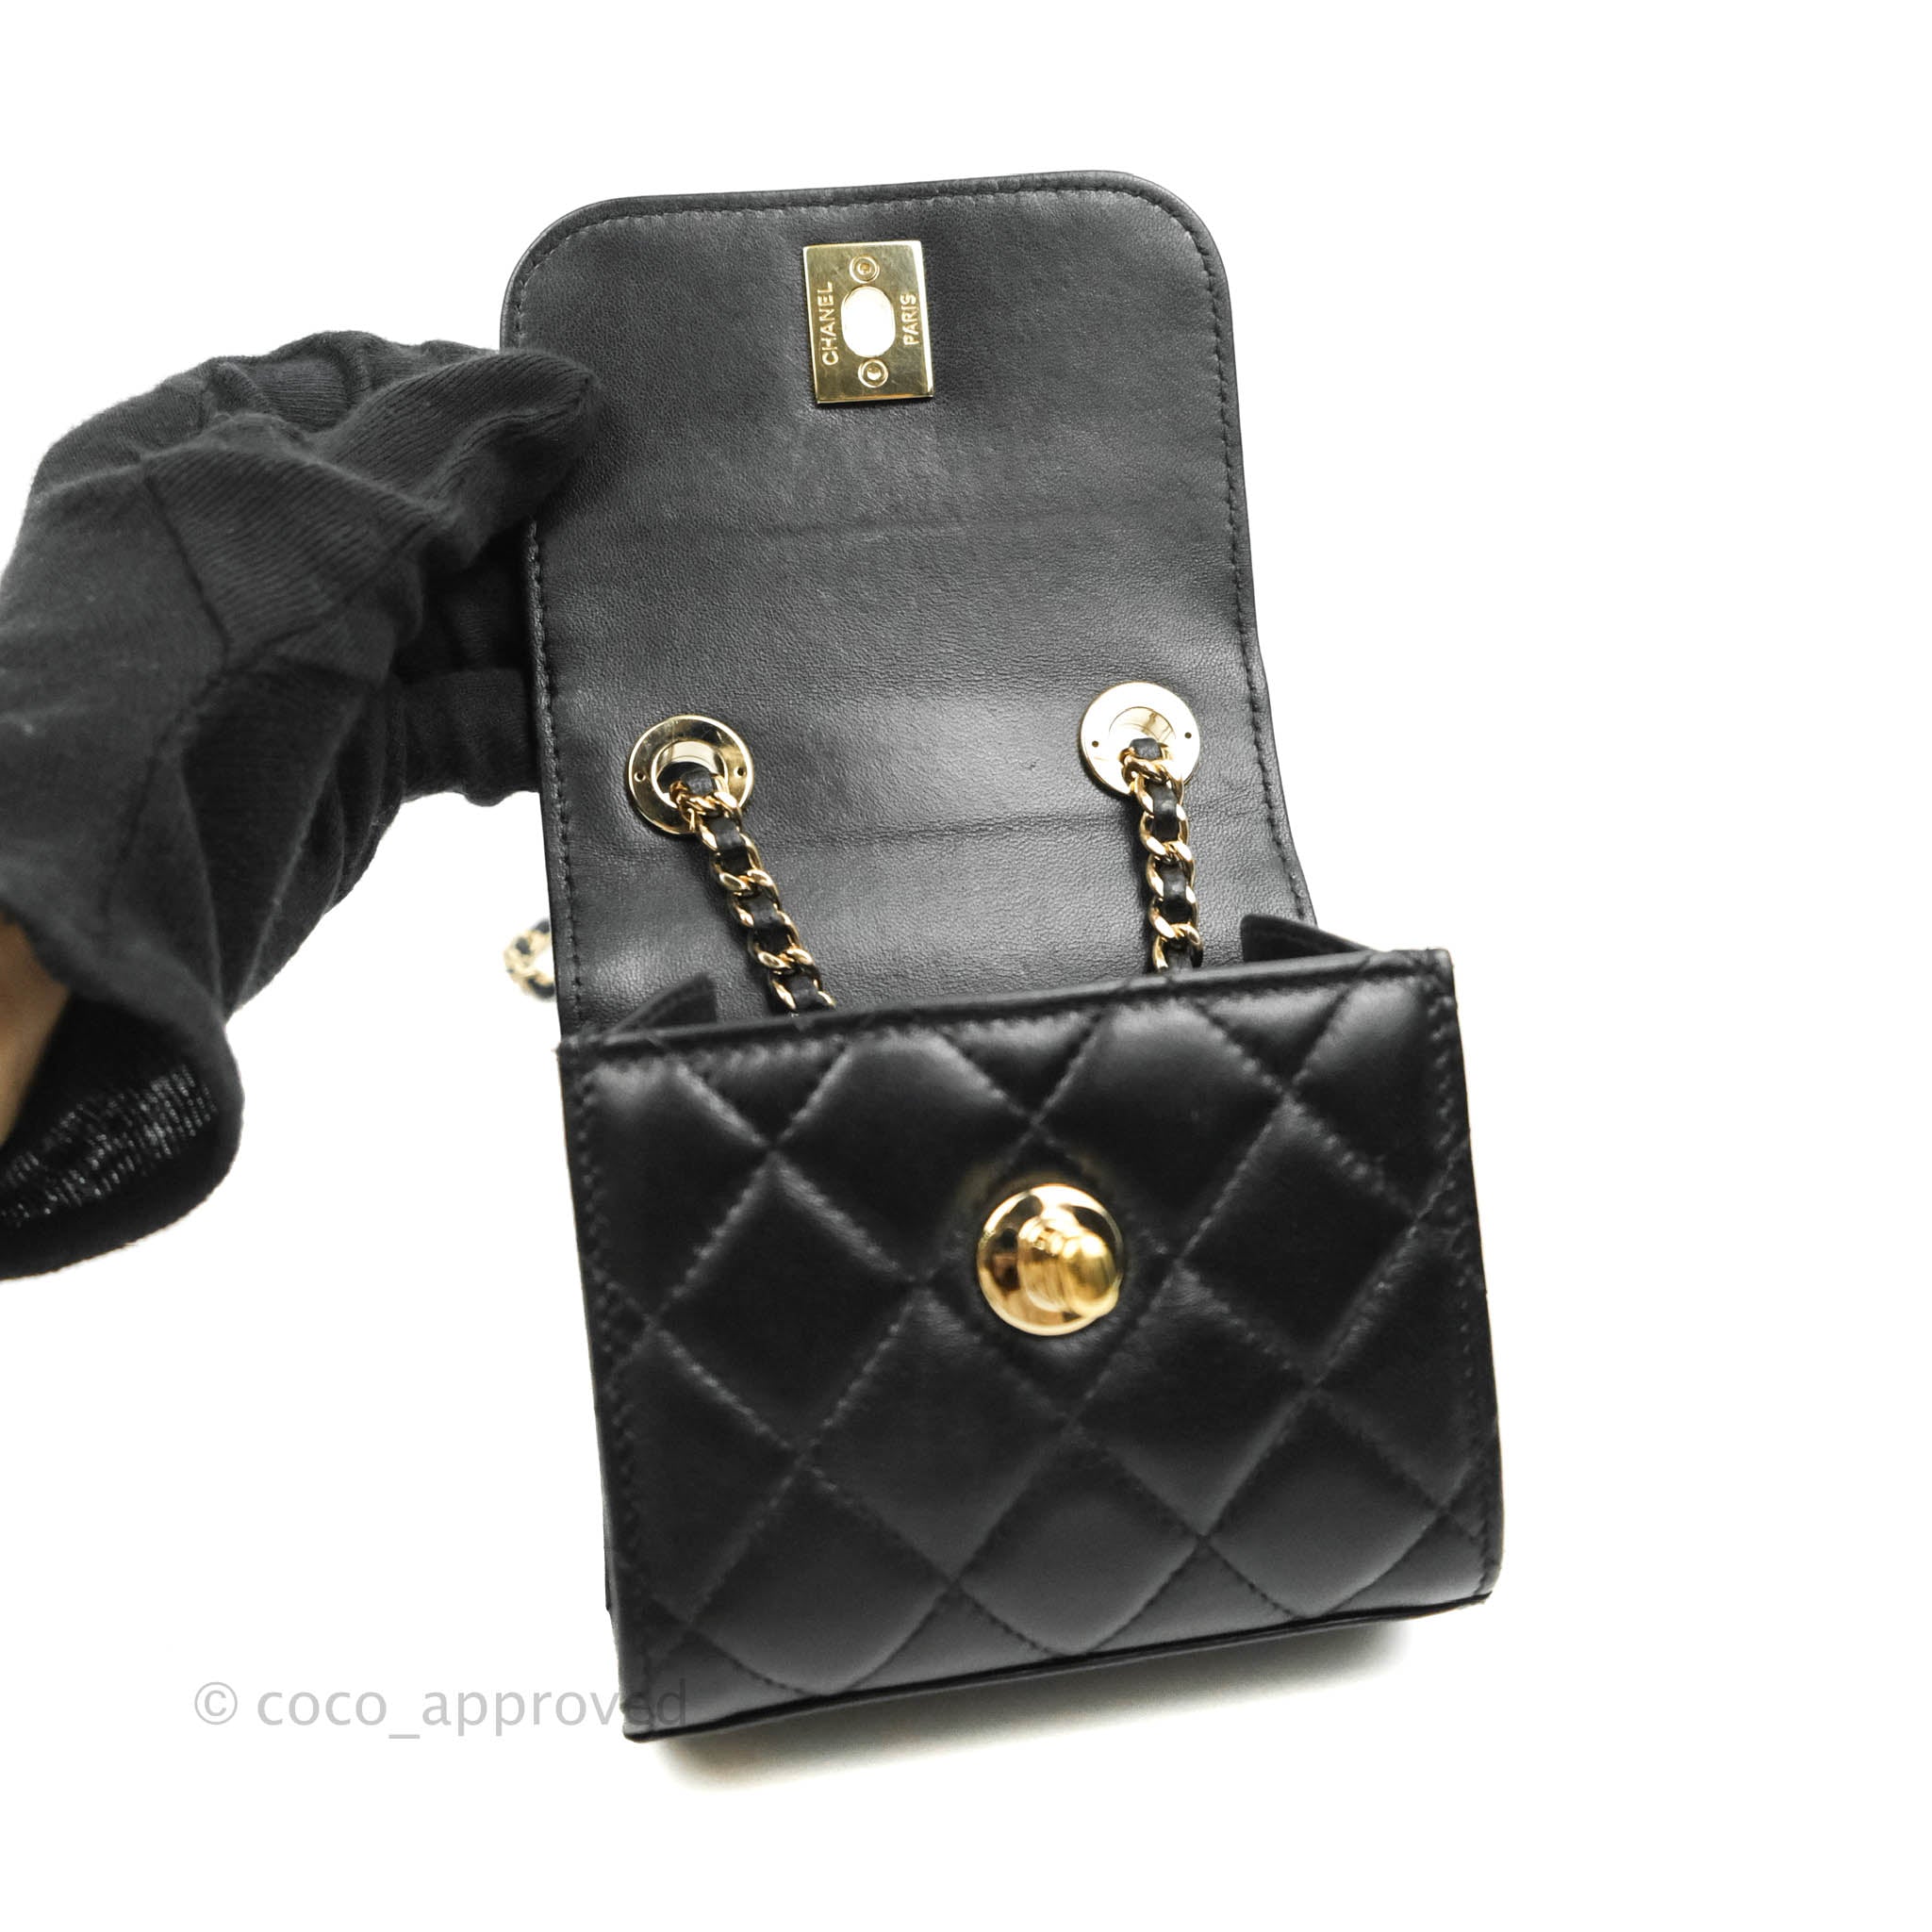 Chanel Gold Quilted Lambskin Mini Phone Holder Clutch